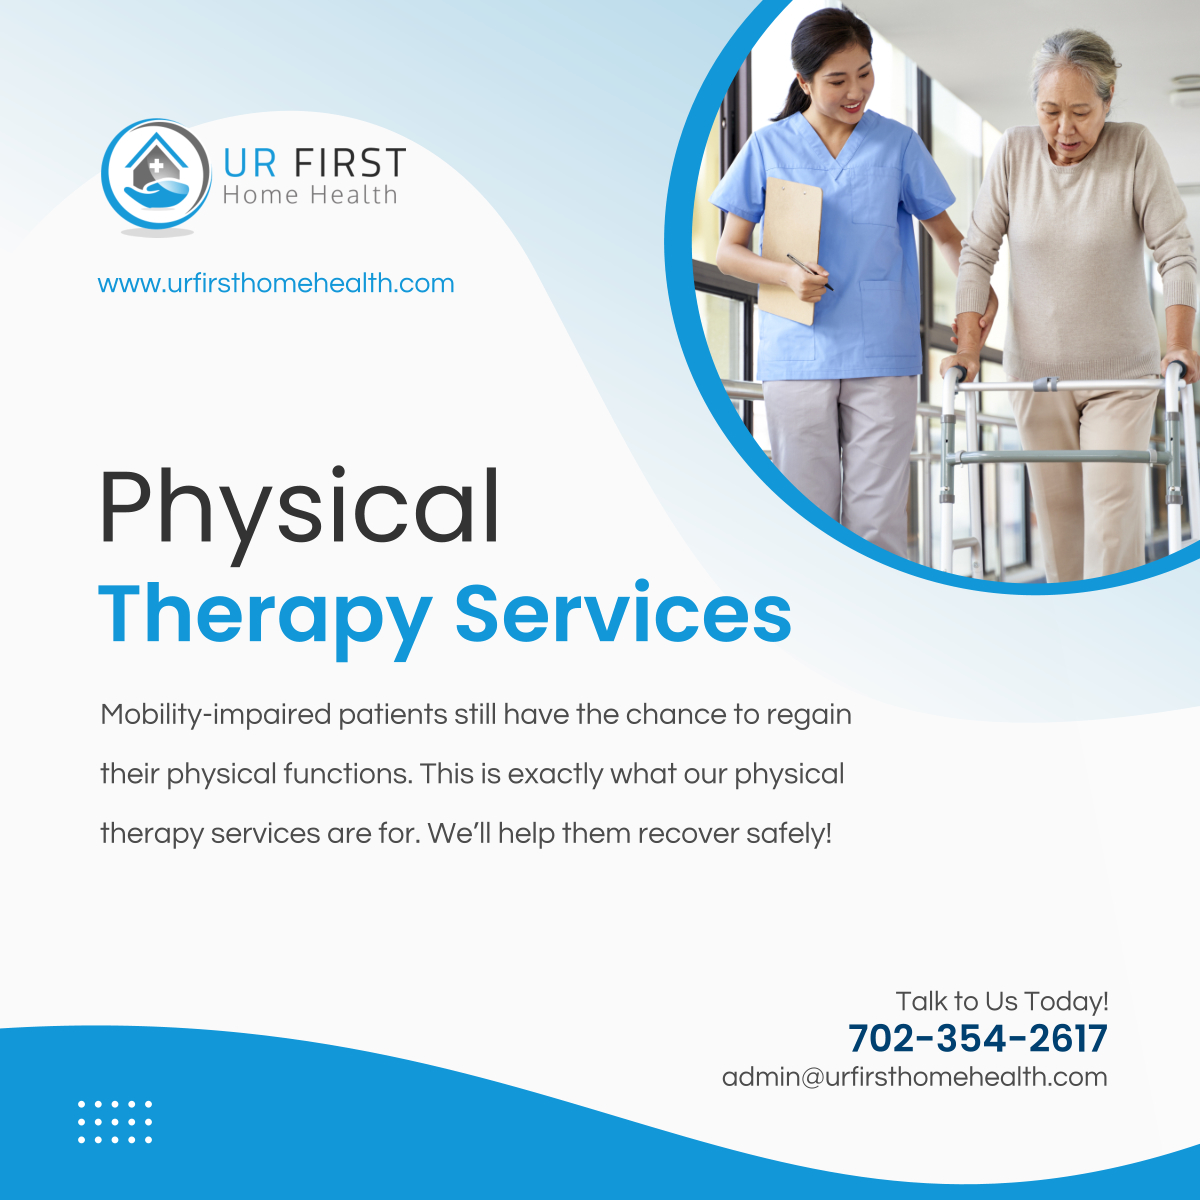 Among the high-quality services that we offer are physical therapy services. 

Read more: business.facebook.com/photo.php?fbid…

#LasVegasNV #PhysicalTherapy #HomeHealthCare #HealthcareProvider #HomeHealthcareSolutions